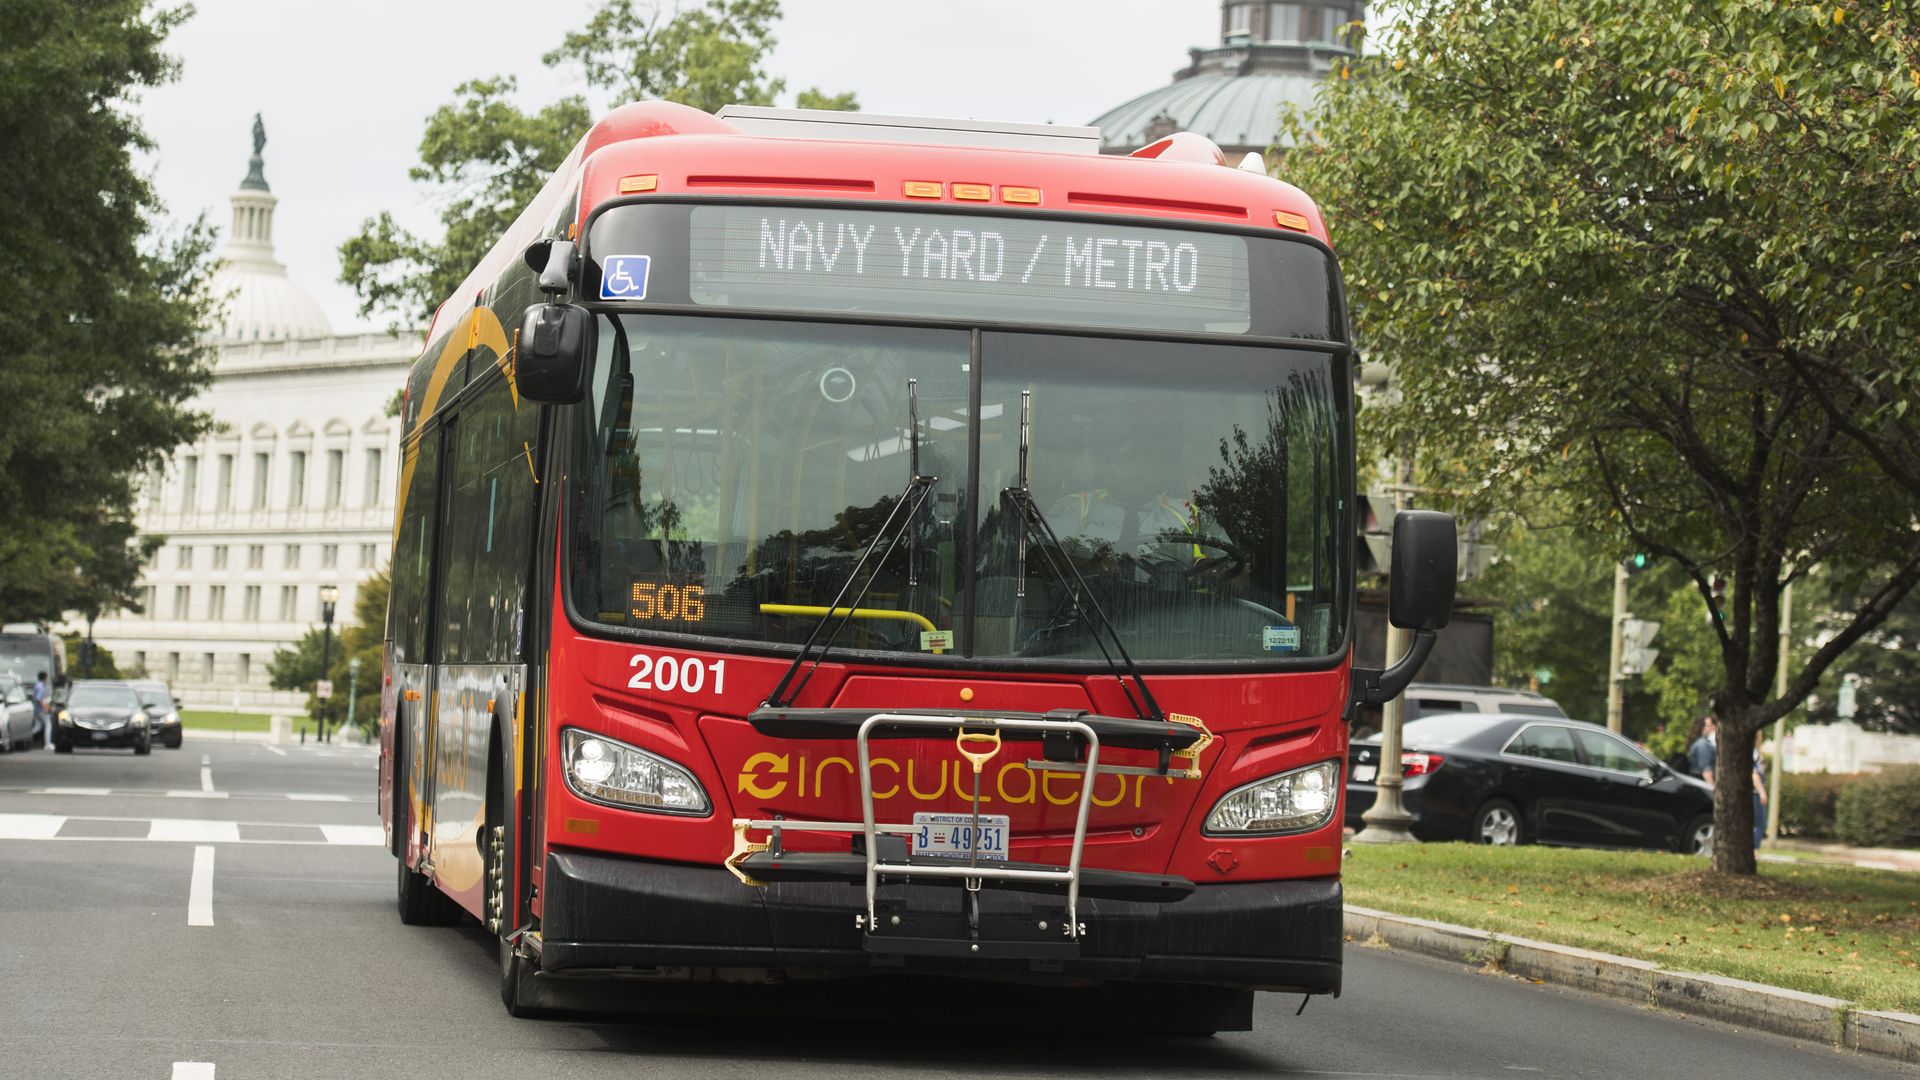 A DC Circulator bus on the road.